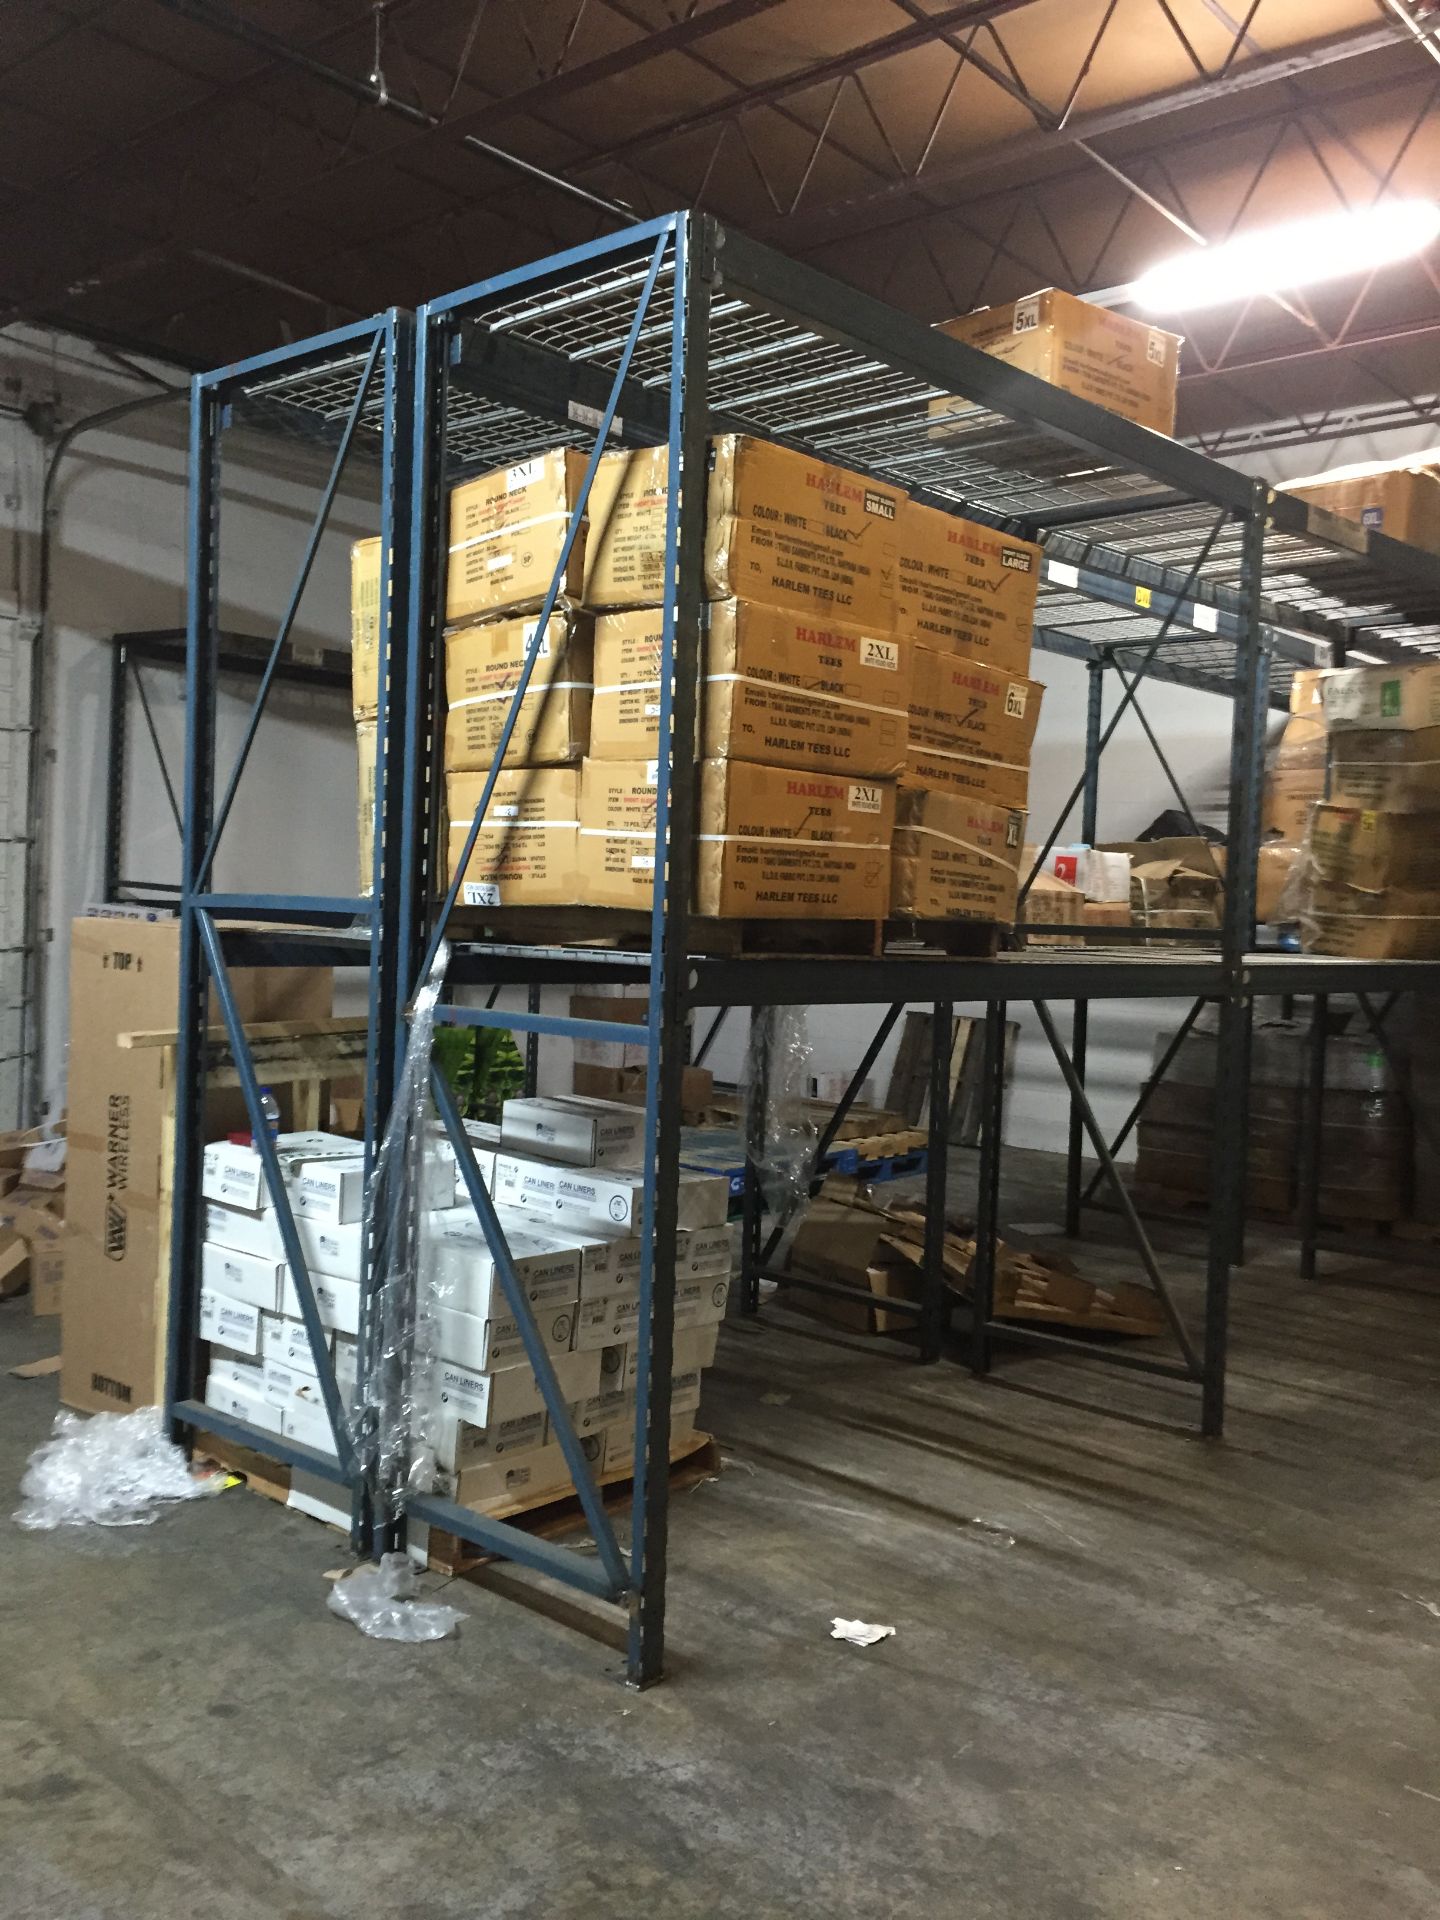 96"H X 36"D X 96"L STOCK ROOM SHELVING, TOTAL 10 SECTIONS WITH 2 BEAM LEVELS EACH,  INCLUDES